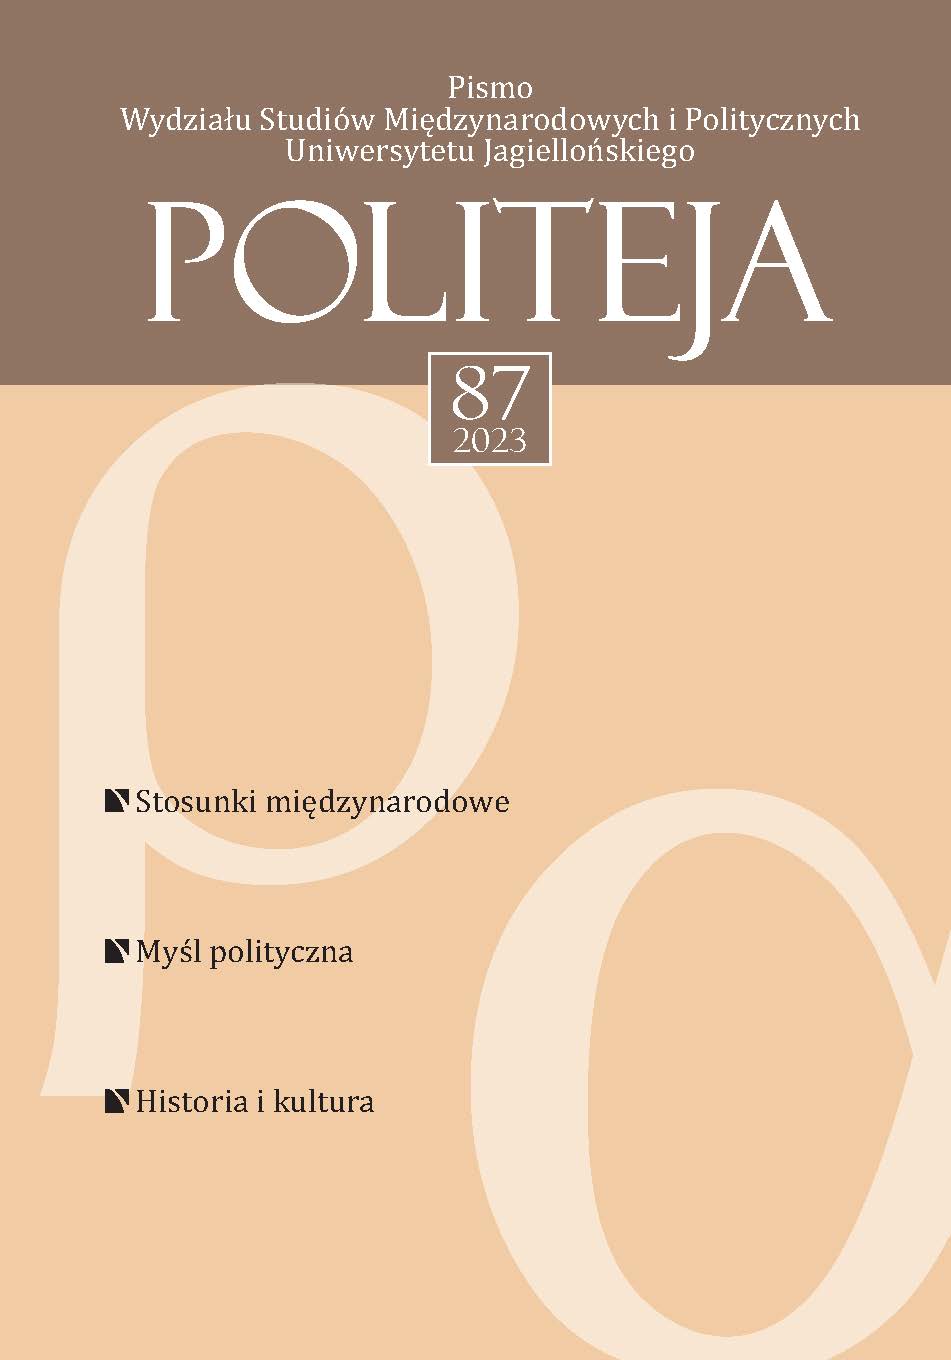 Two Traditions of English Political Thought in the Political Thinking of the “Stańczycy” Cover Image